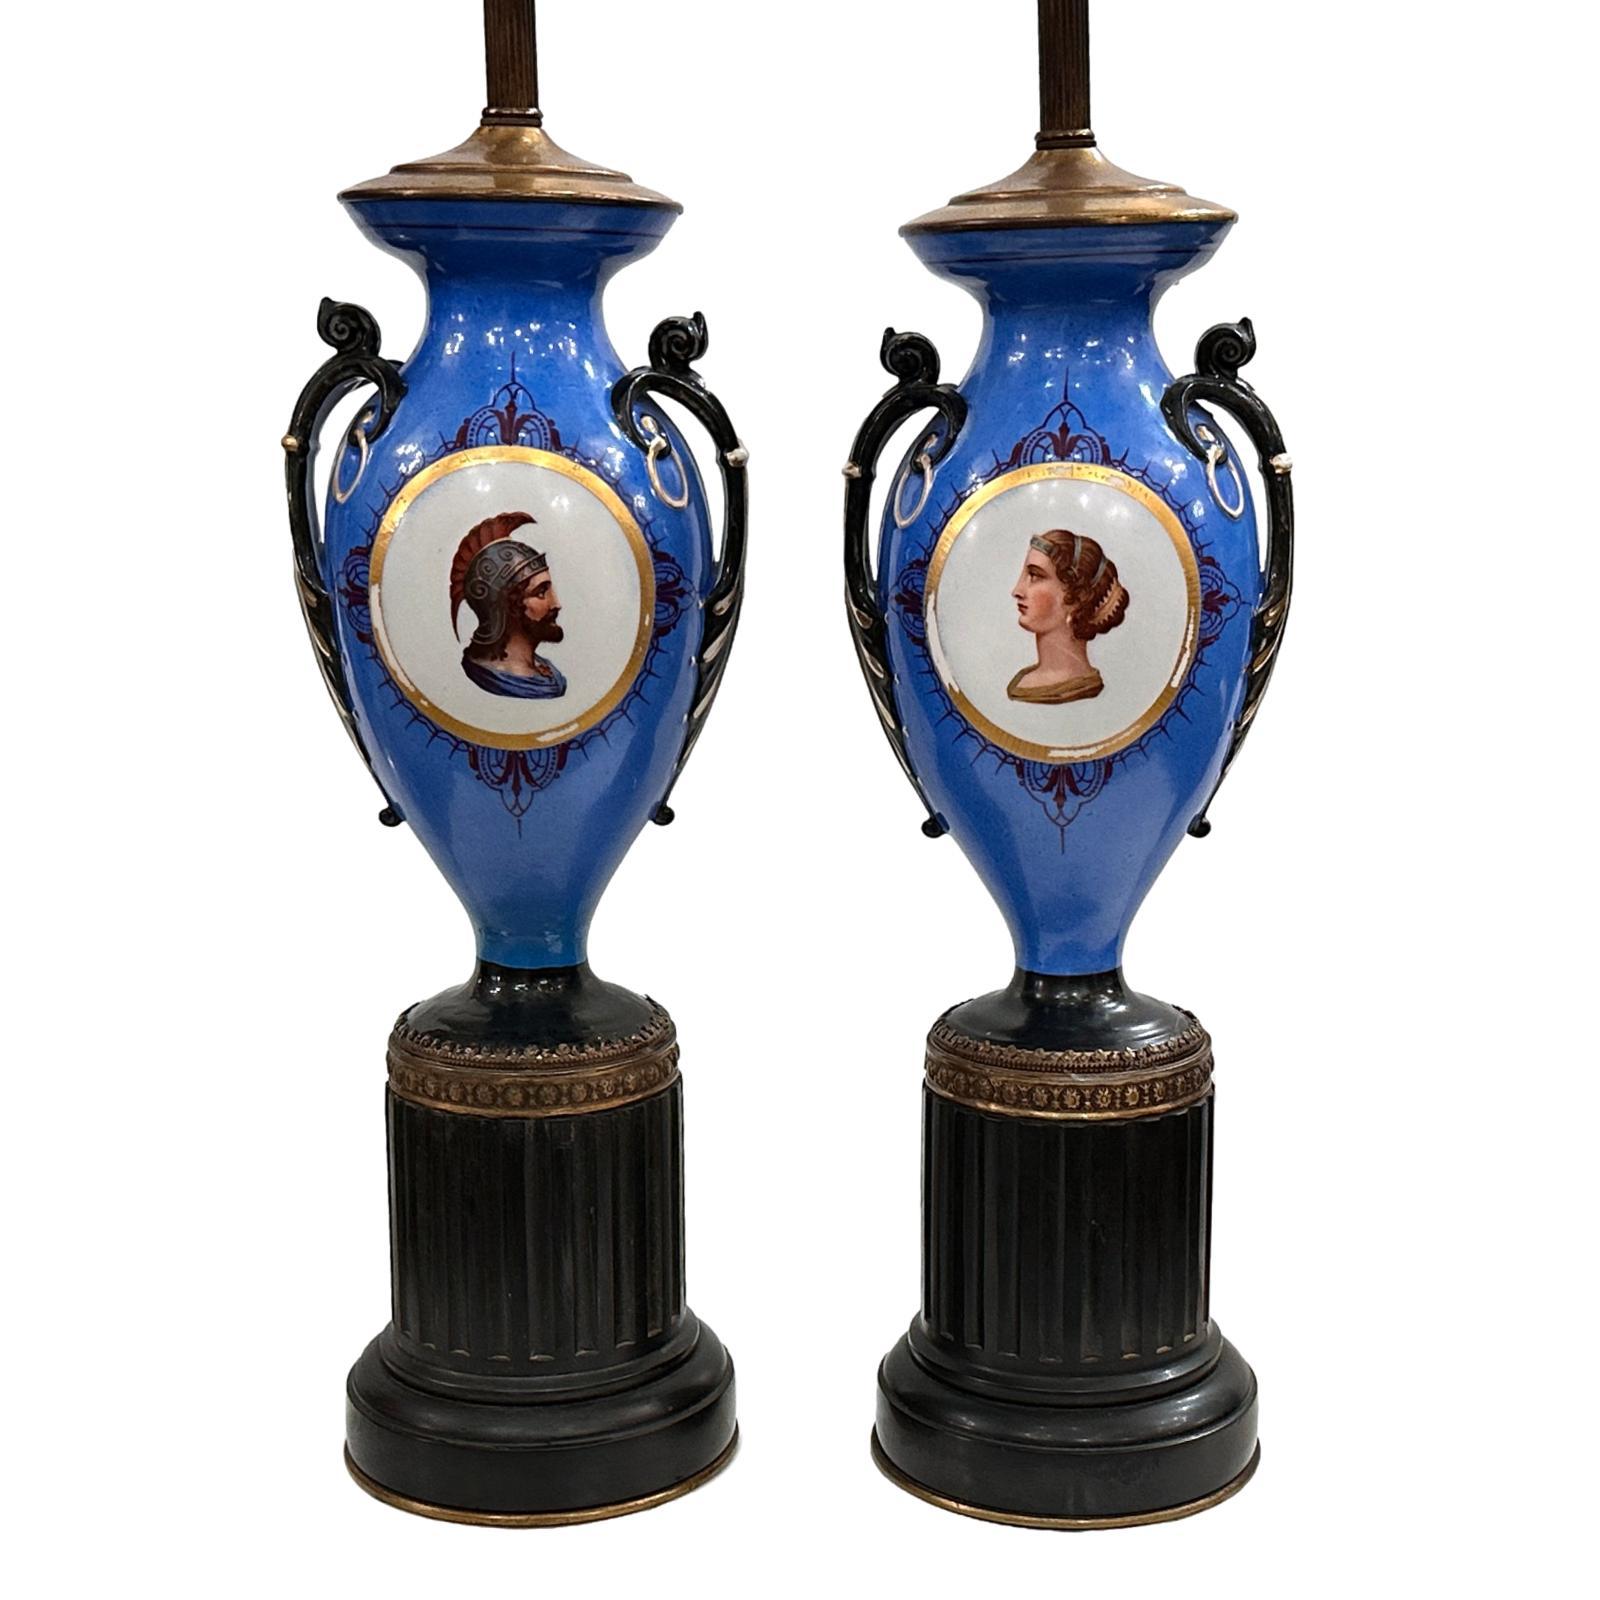 A circa 1920's pair of French vases mounted as lamps.

Measurements:
Height of body: 18